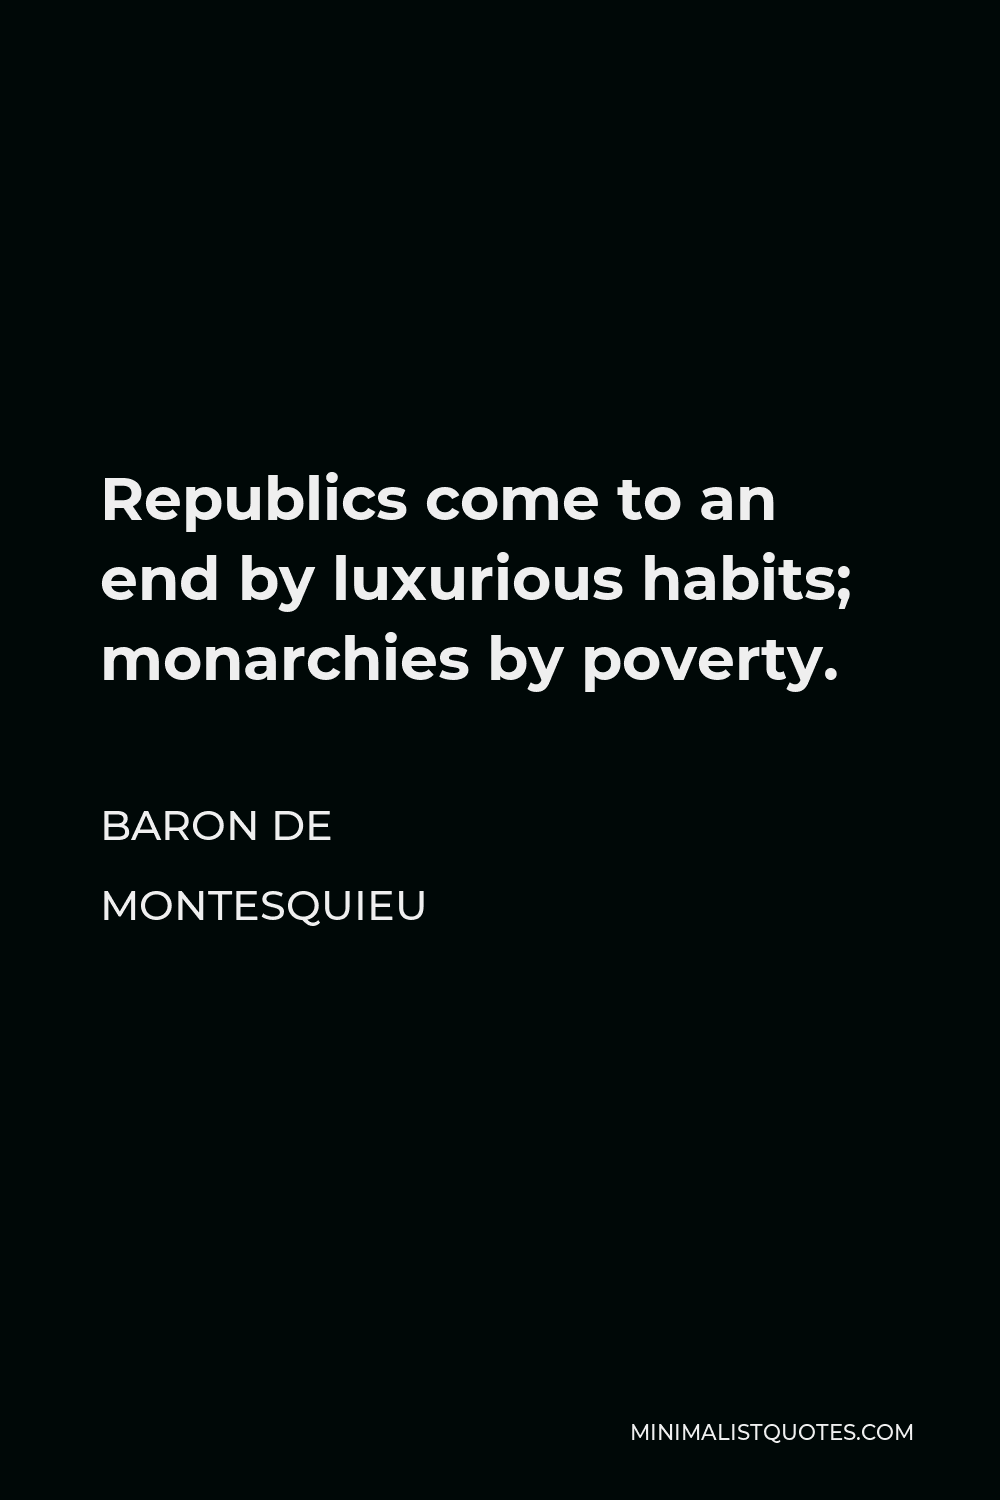 Baron de Montesquieu Quote - Republics come to an end by luxurious habits; monarchies by poverty.